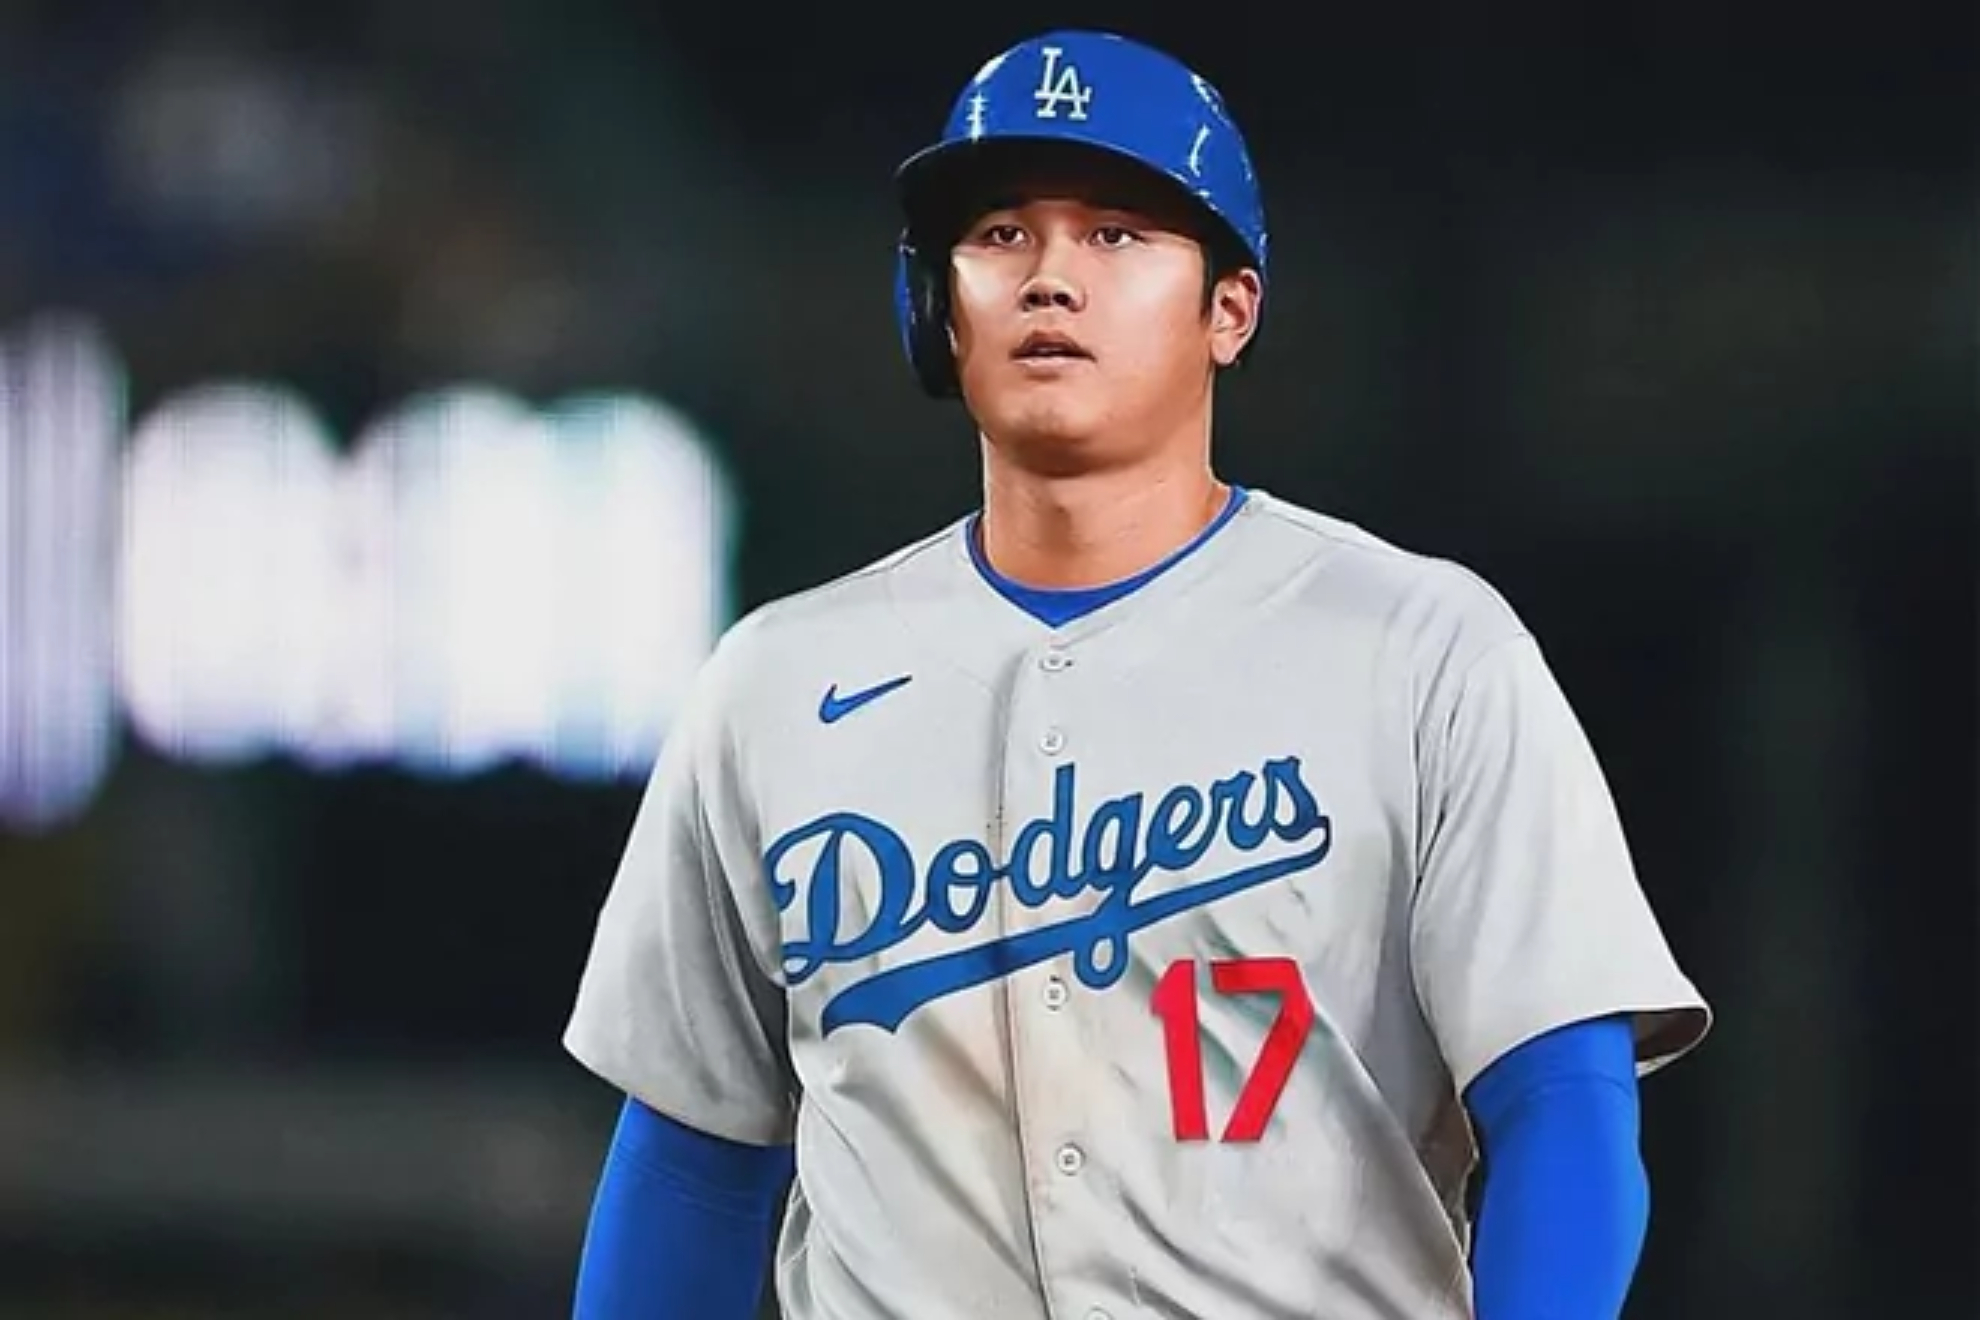 How will Shohei Ohtanis contract with the Dodgers impact record signings in MLB, NFL, NBA, and NHL?